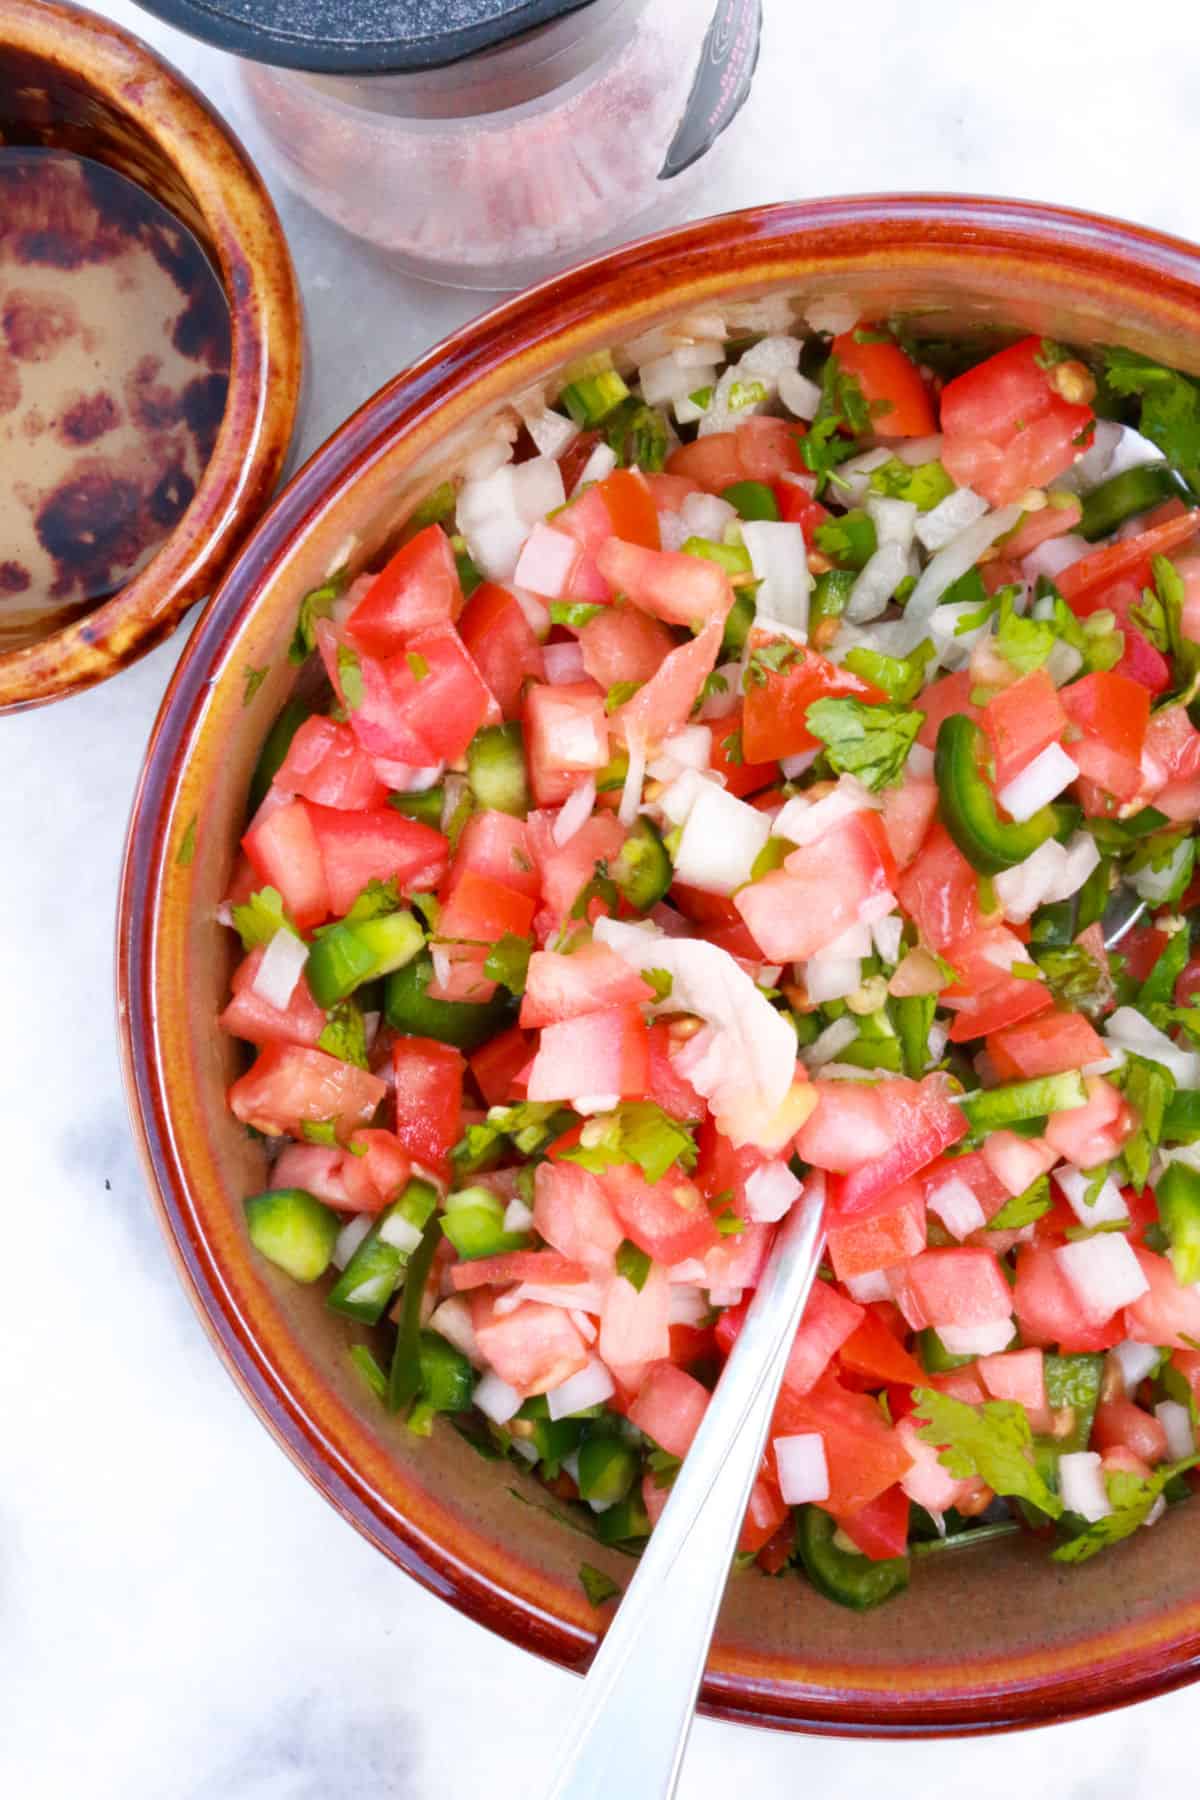 Bowl of Pico De Gallo with salt and a bowl of white vinegar behind it